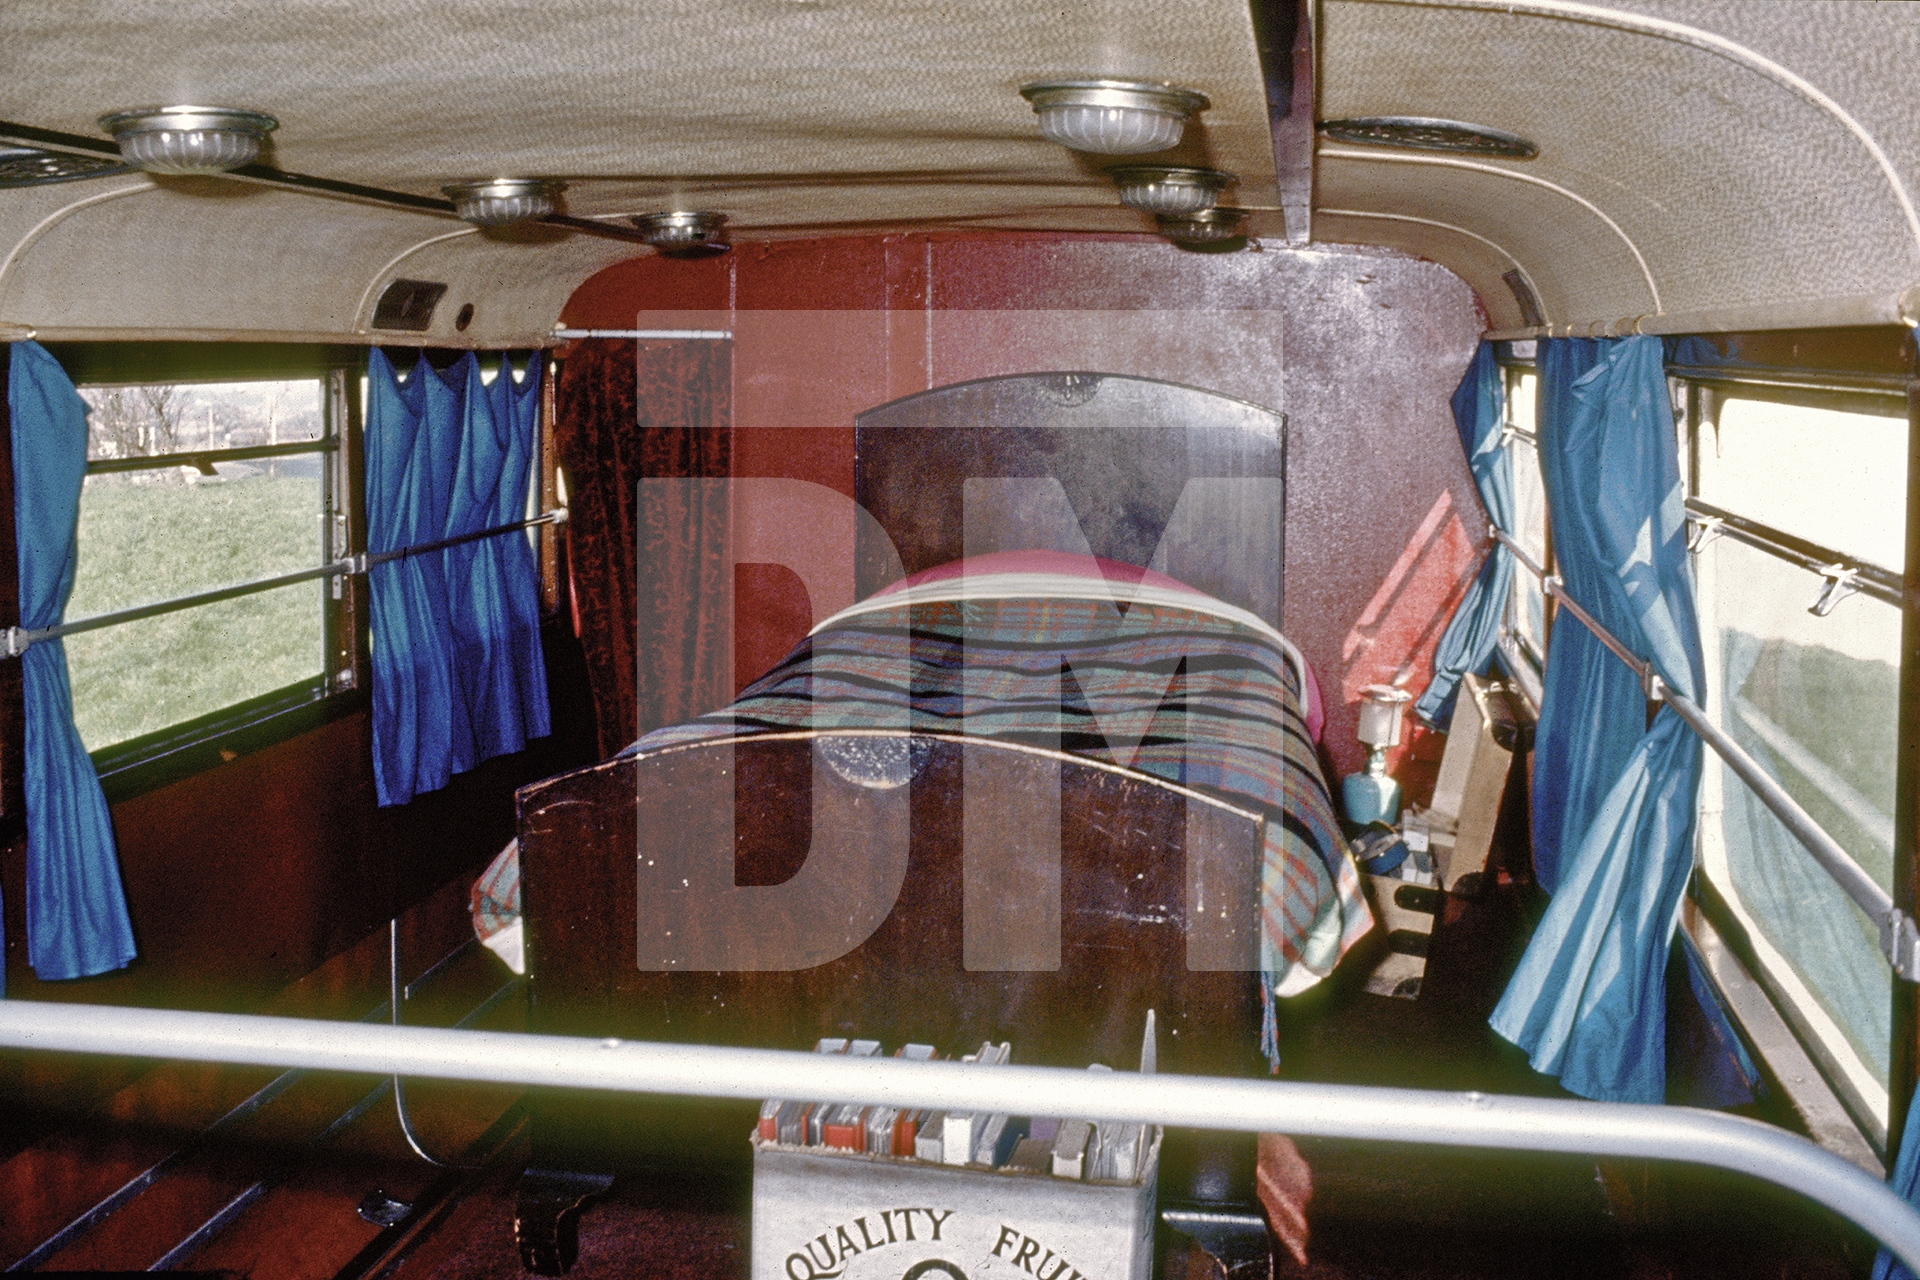 Free Photographic Omnibus, interior upstairs looking towards the rear. Birmingham, March 1974 by Daniel Meadows